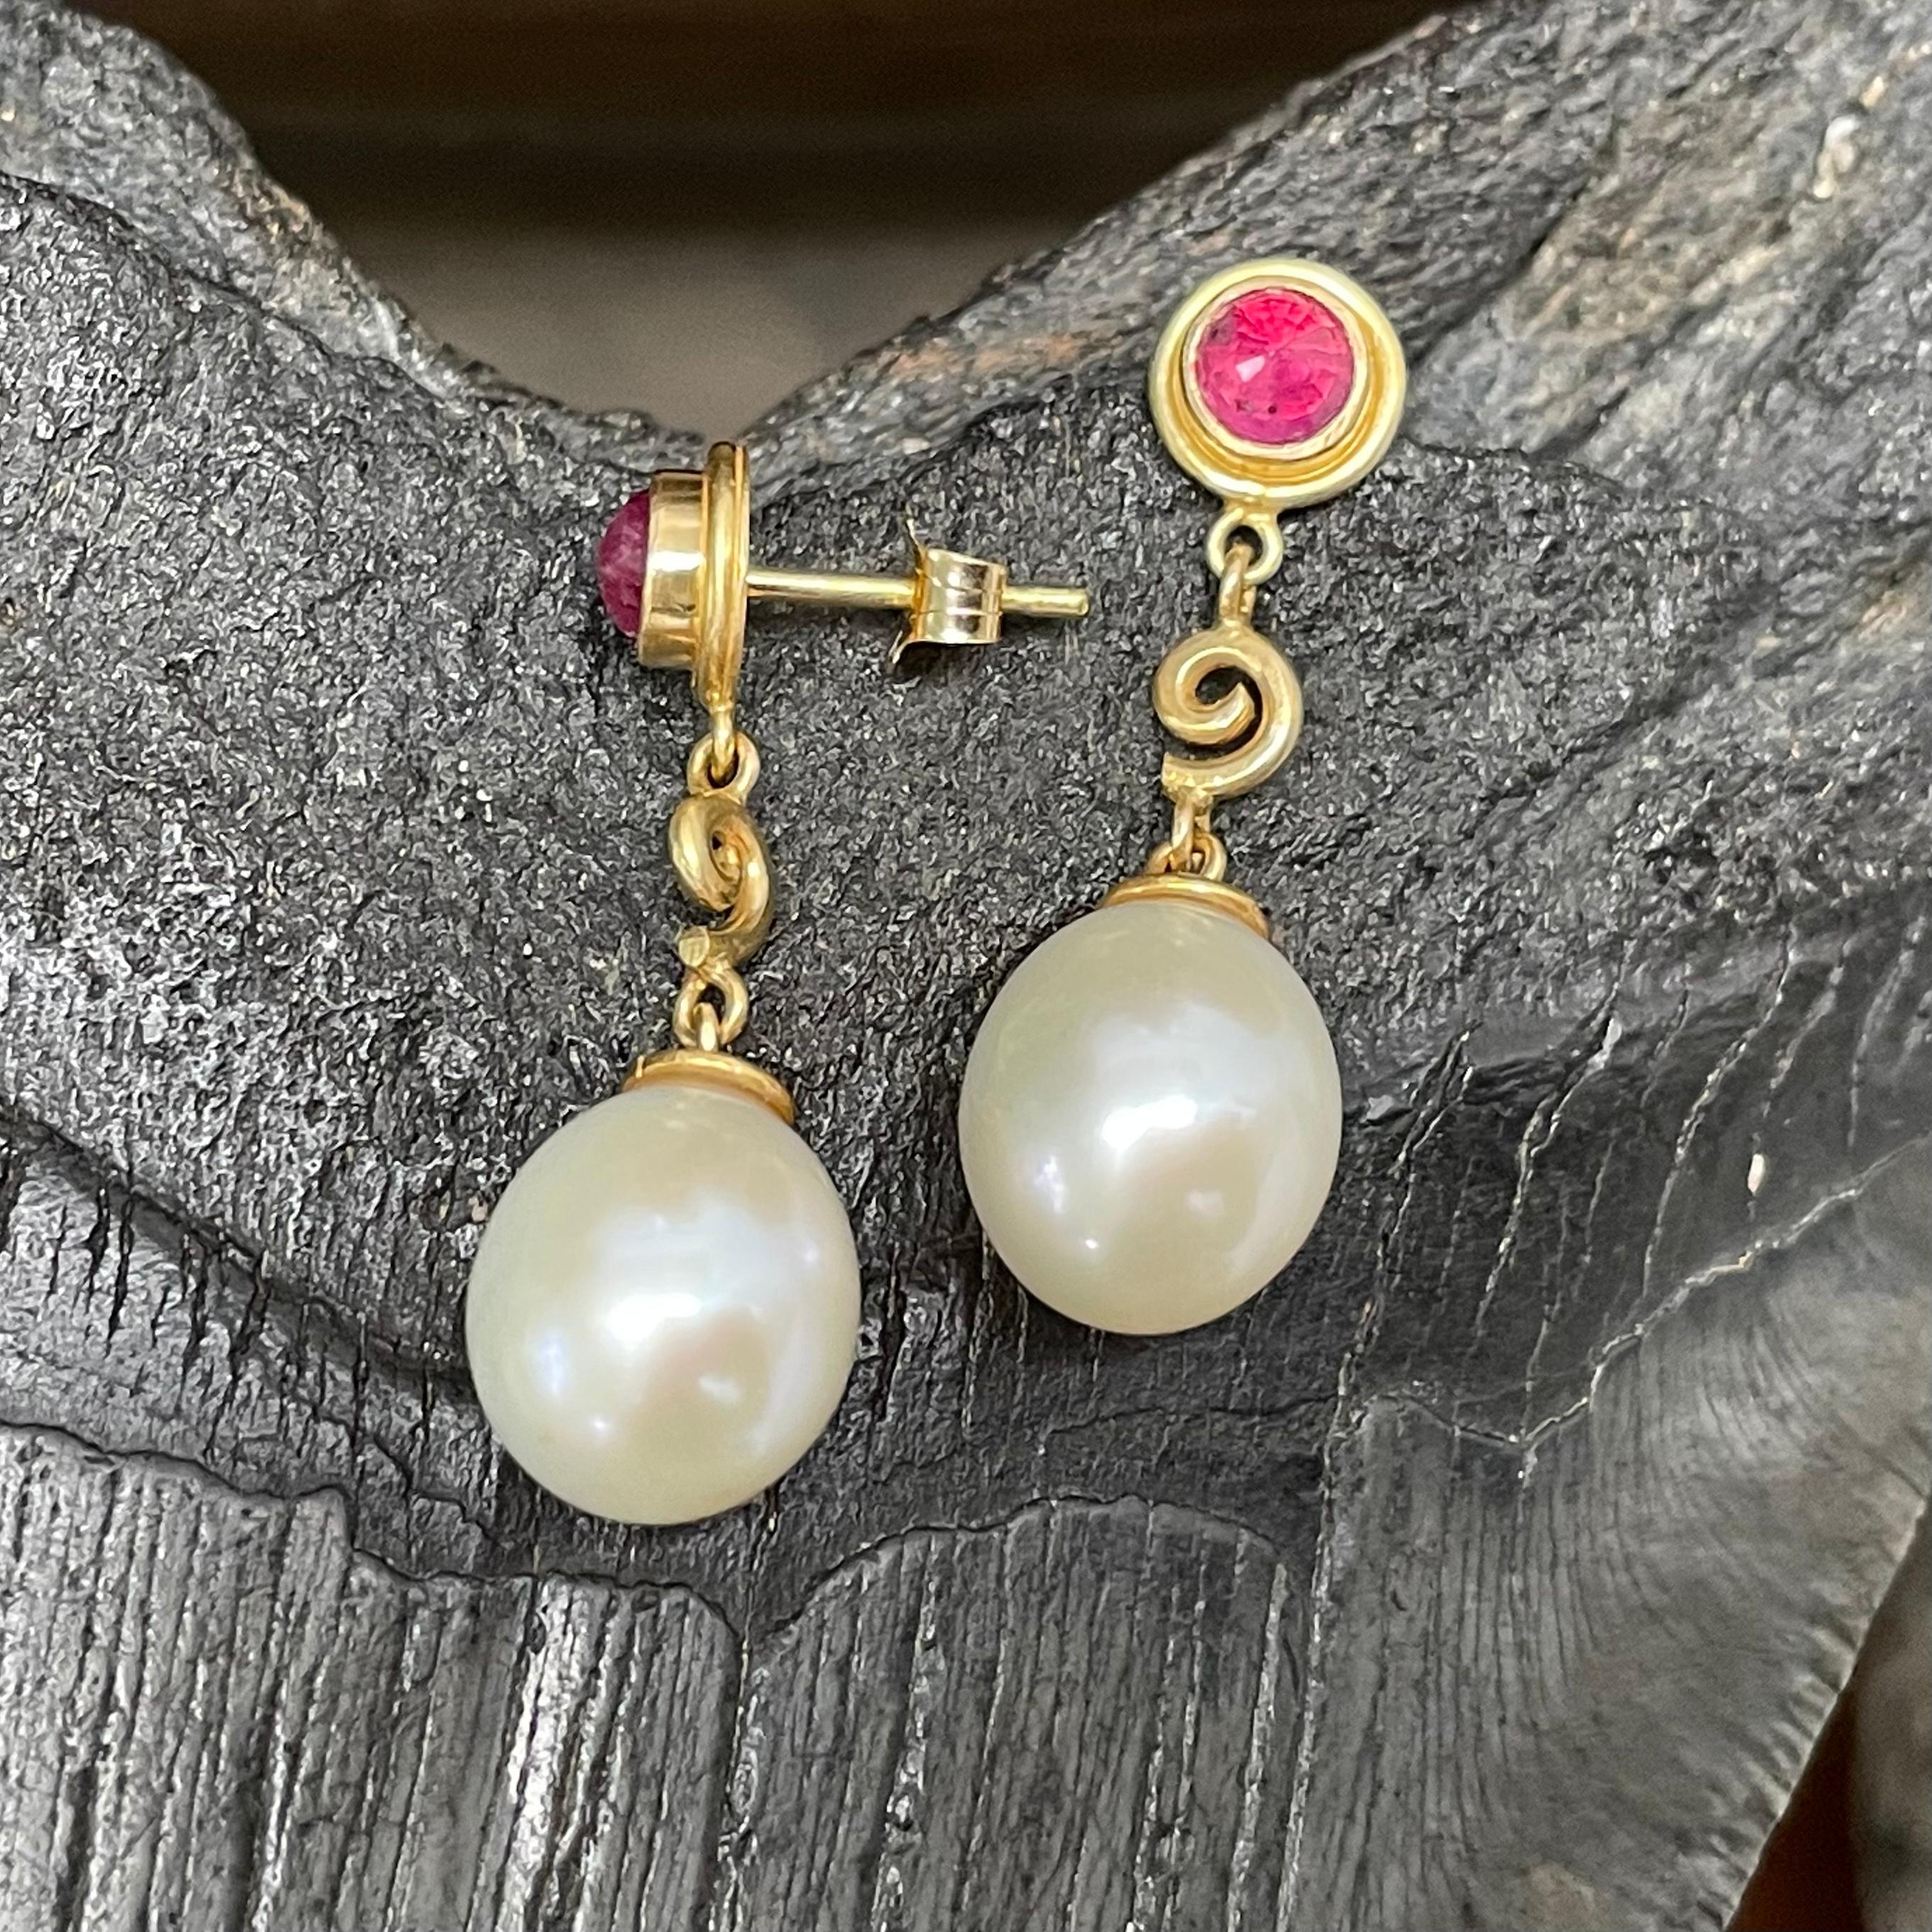 Two lustrous 12 mm drop freshwater pearls are suspended below 4mm reverse faceted rubies (1.2 carats total) posts, with spiral accent components between, in this opulent creation.  The color contrasts between ruby, gold and pearl enchant.  